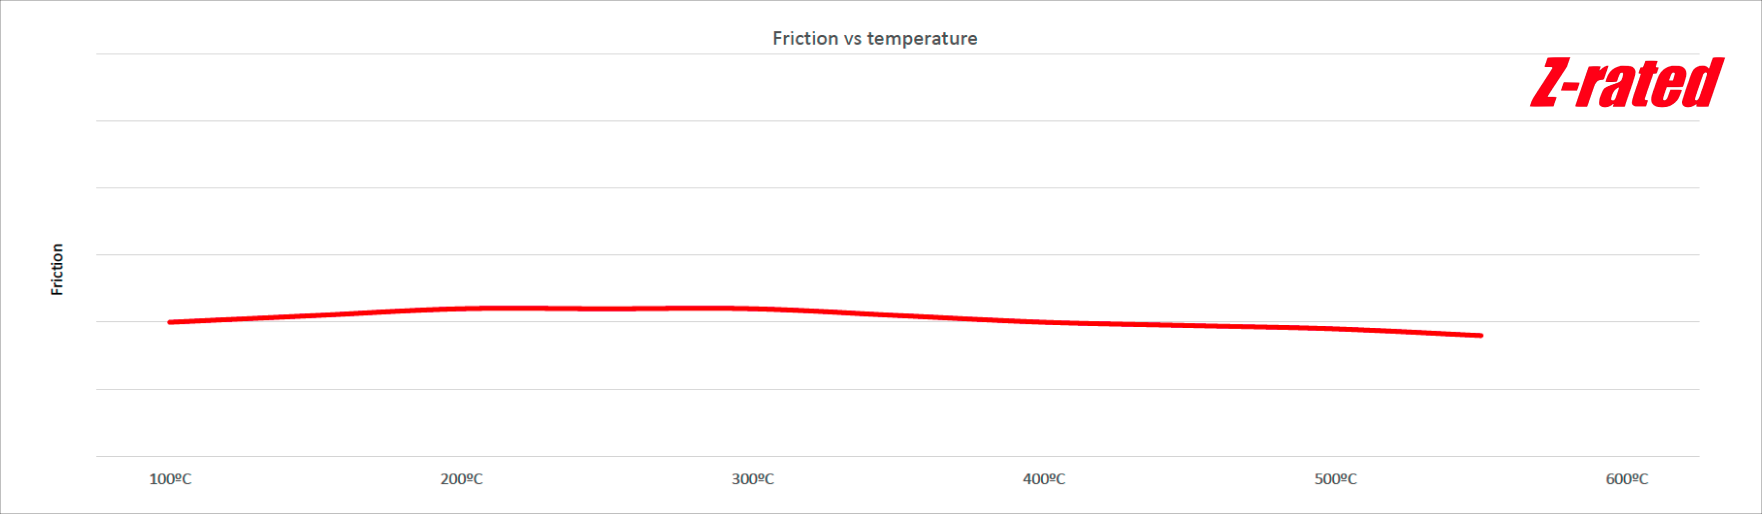 PFC Z-rated Compound Friction Vs Temperature